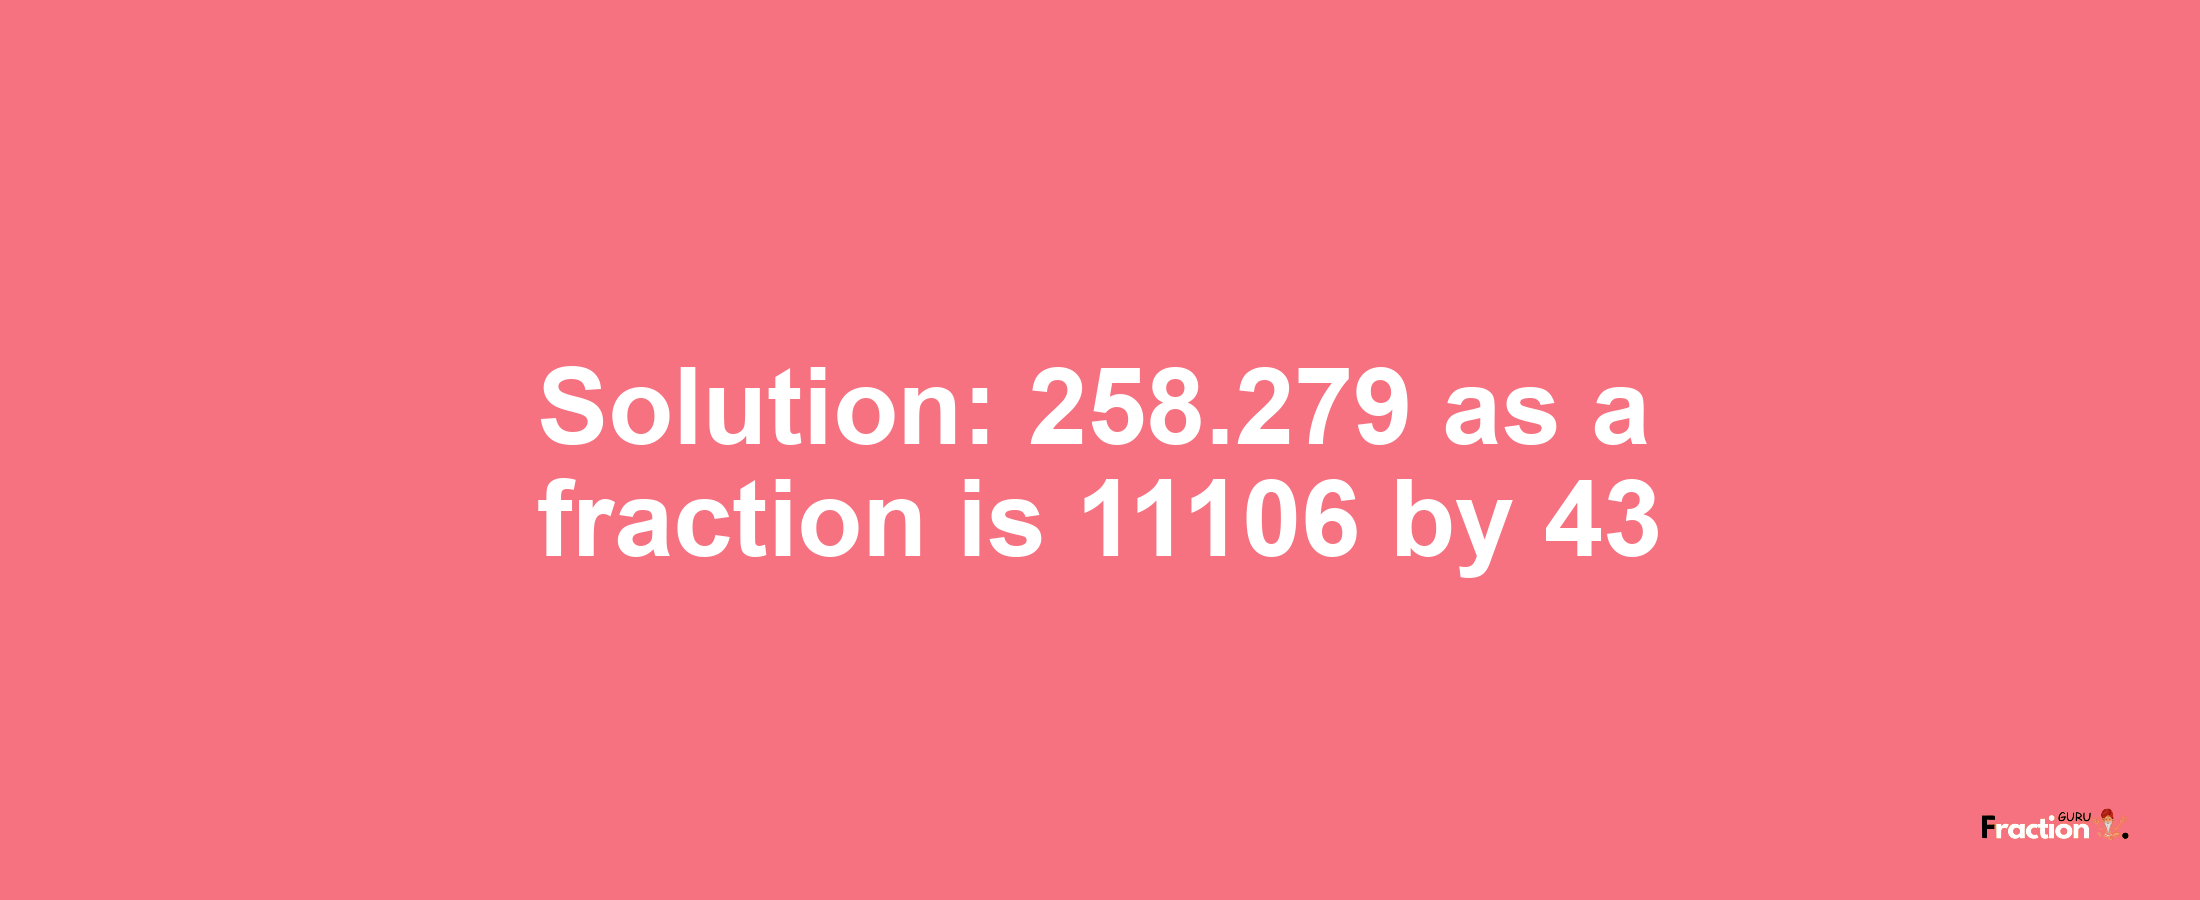 Solution:258.279 as a fraction is 11106/43